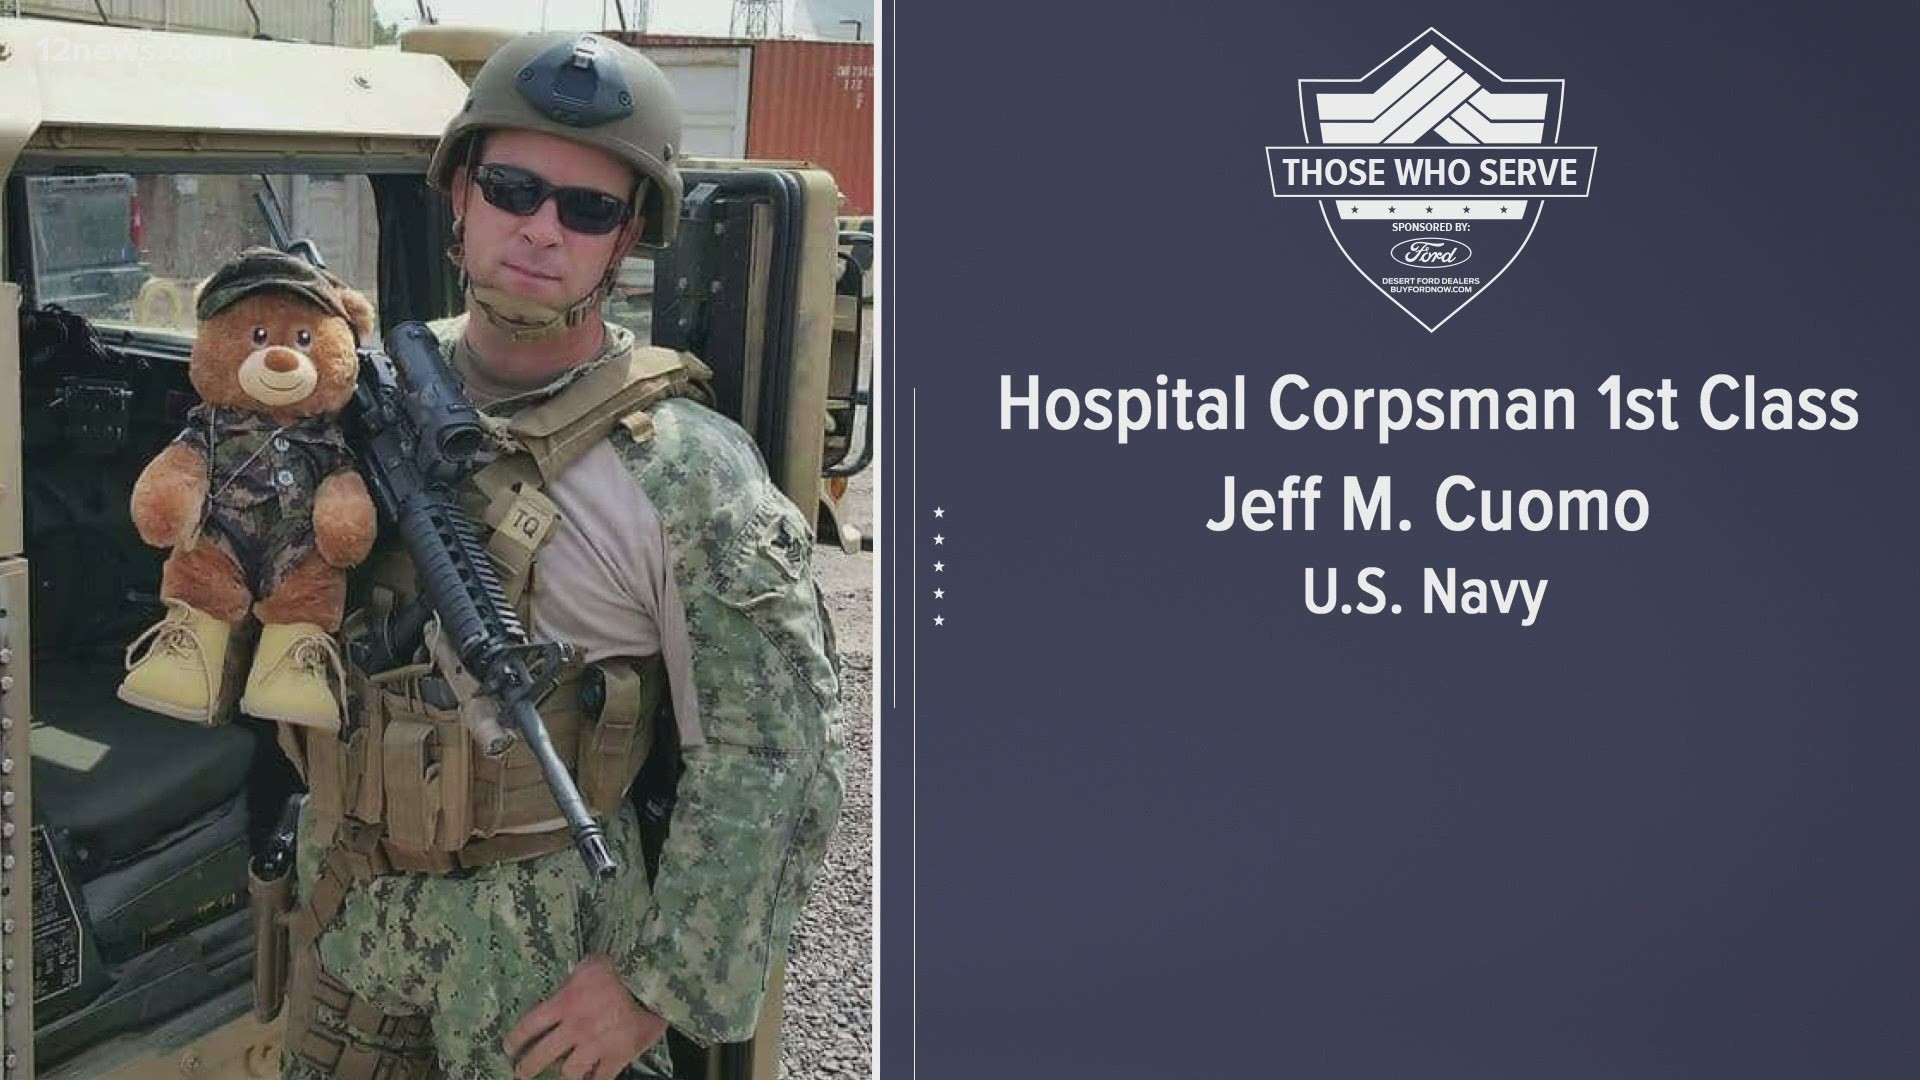 12 News is honoring Those Who Serve. This is Technical Sergeant Maria Cloherty of the U.S. Air Force and Hospital Corpsman First Class Jeff Cuomo of the U.S. Navy.